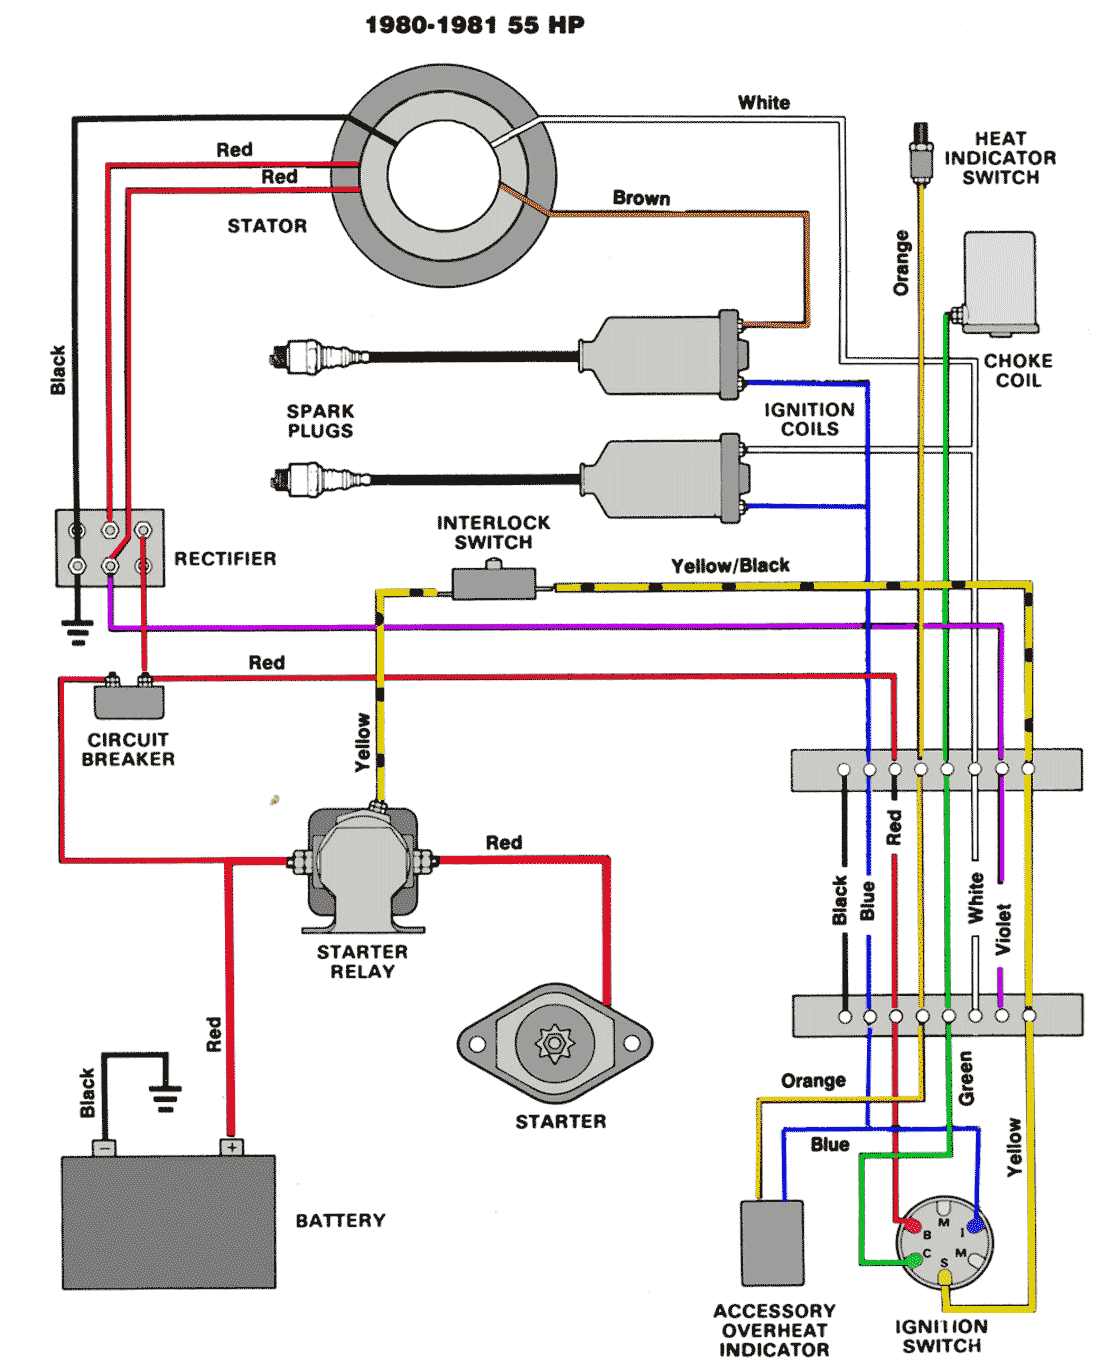 Evinrude Etec Ignition Switch Wiring Diagram from wiringall.com